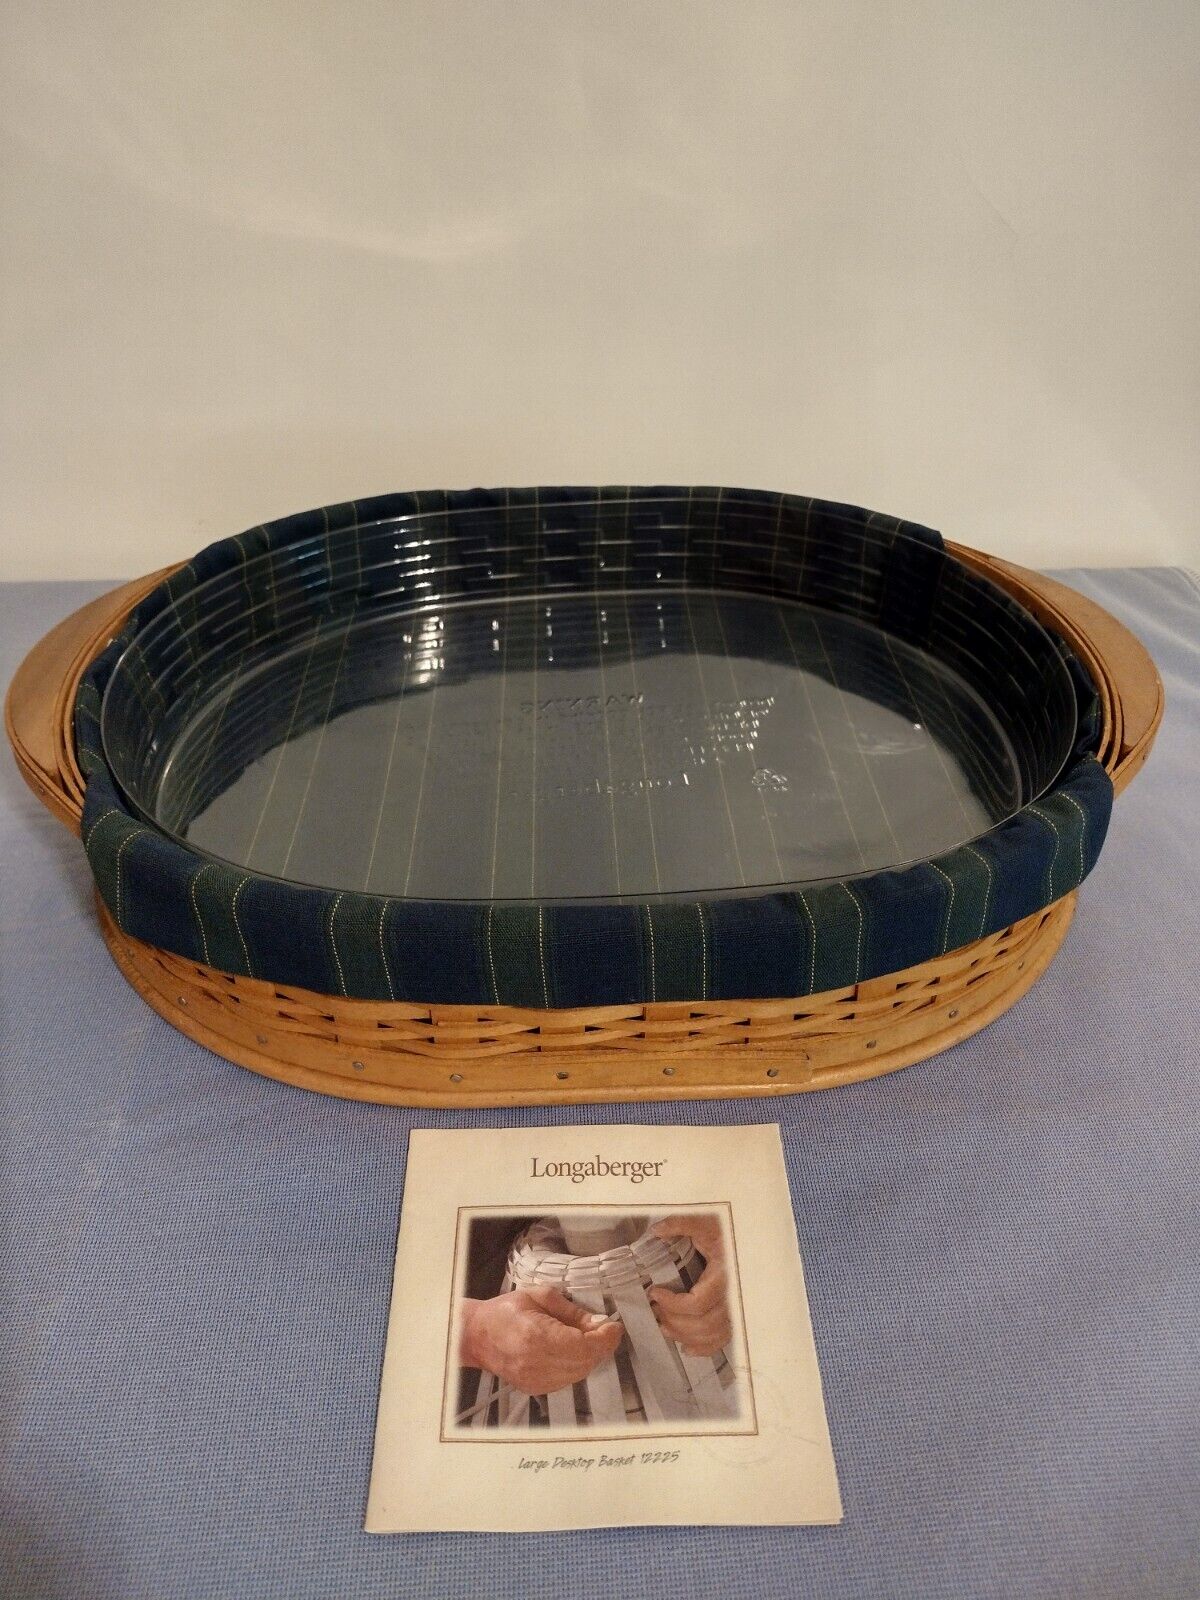 Longaberger 2004 Collectors Club Tea Tray Basket w/ Fabric & Protective Liner